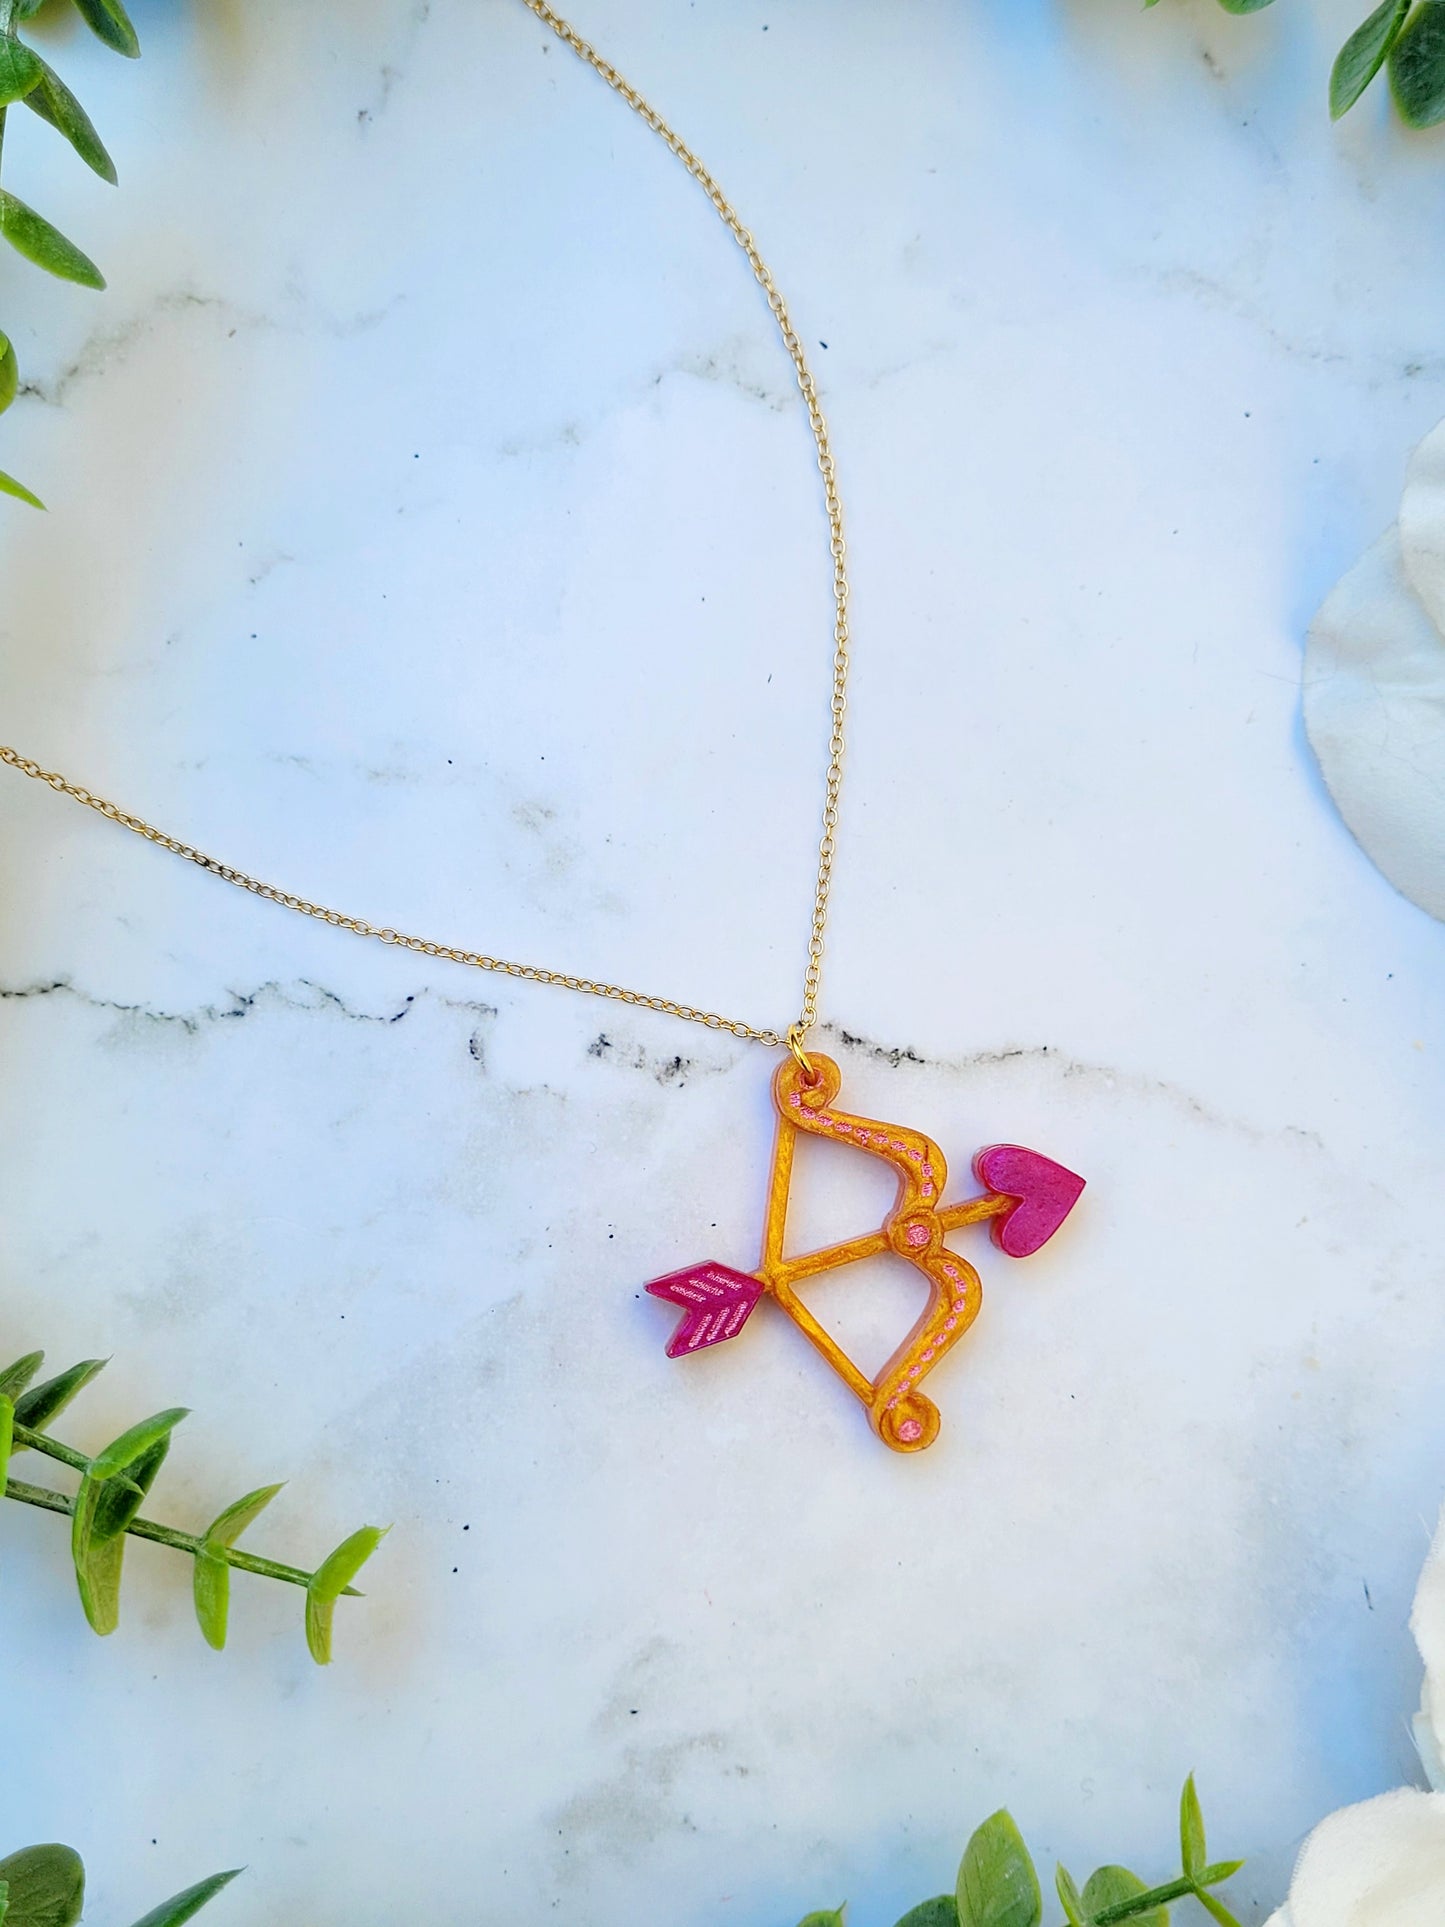 close up of gold and pink cupid's bow necklace on a white marble background surrounded by foliage.